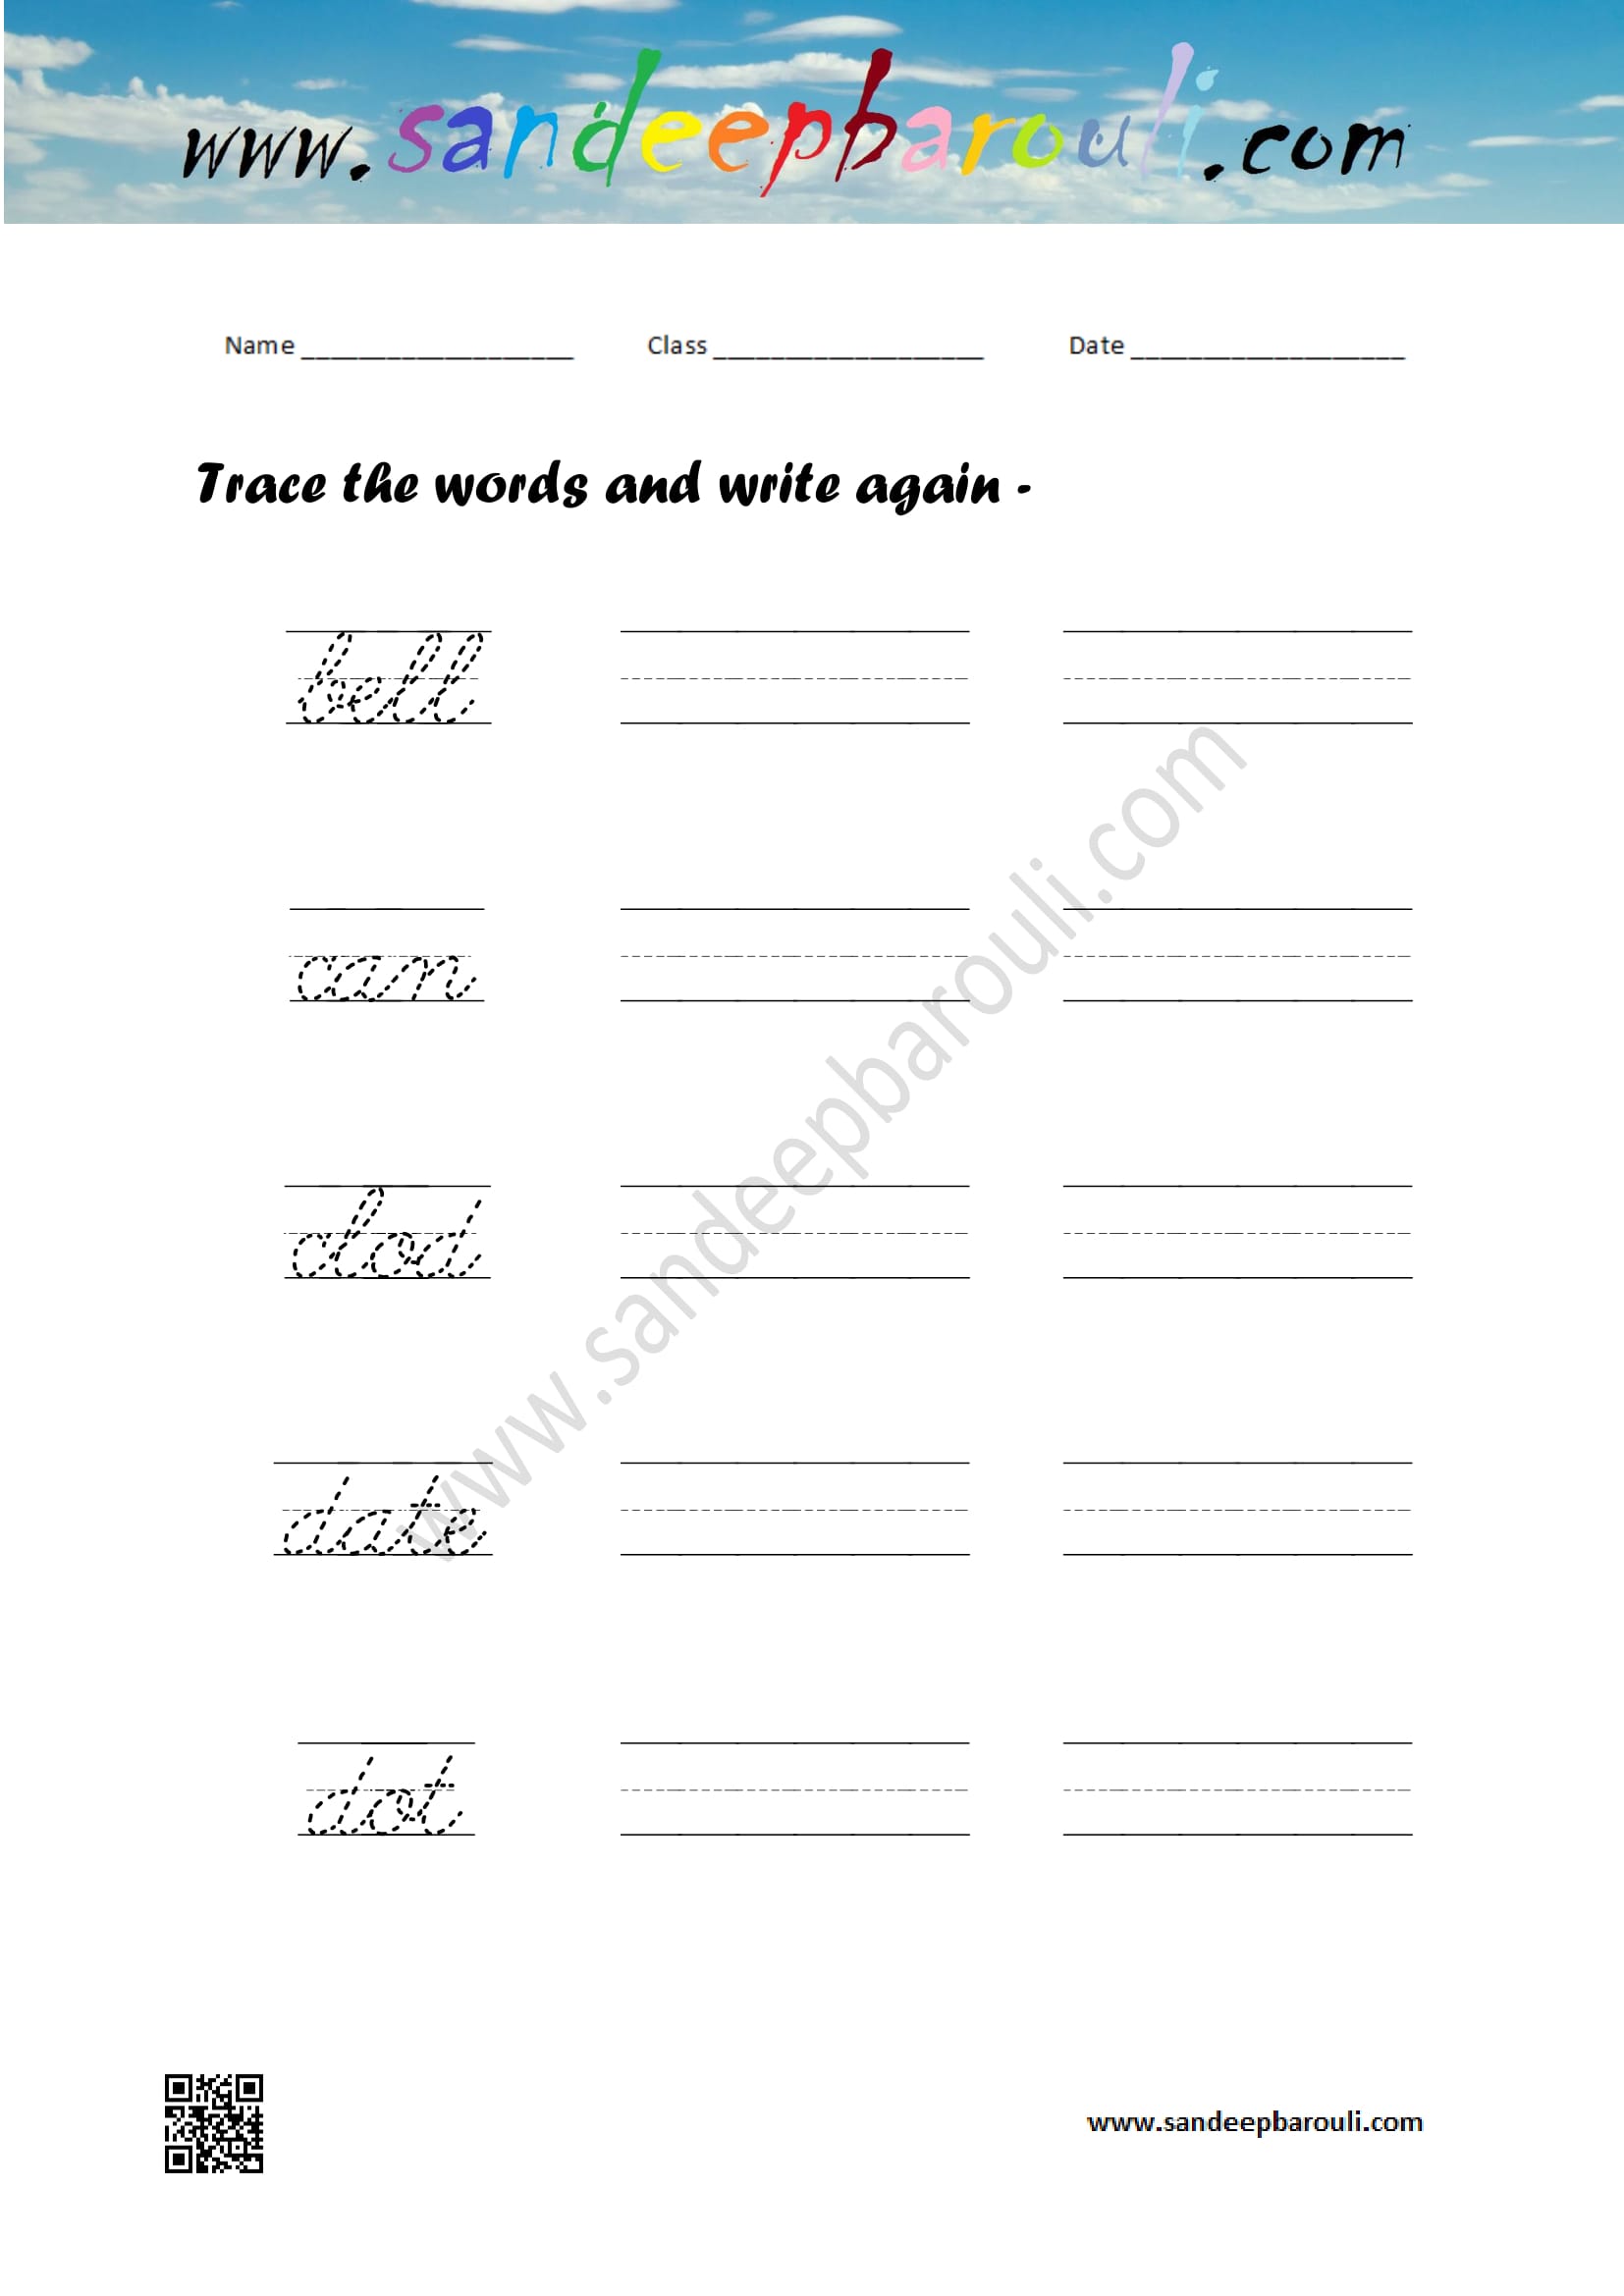 Cursive writing worksheet – trace the words and write again (29)